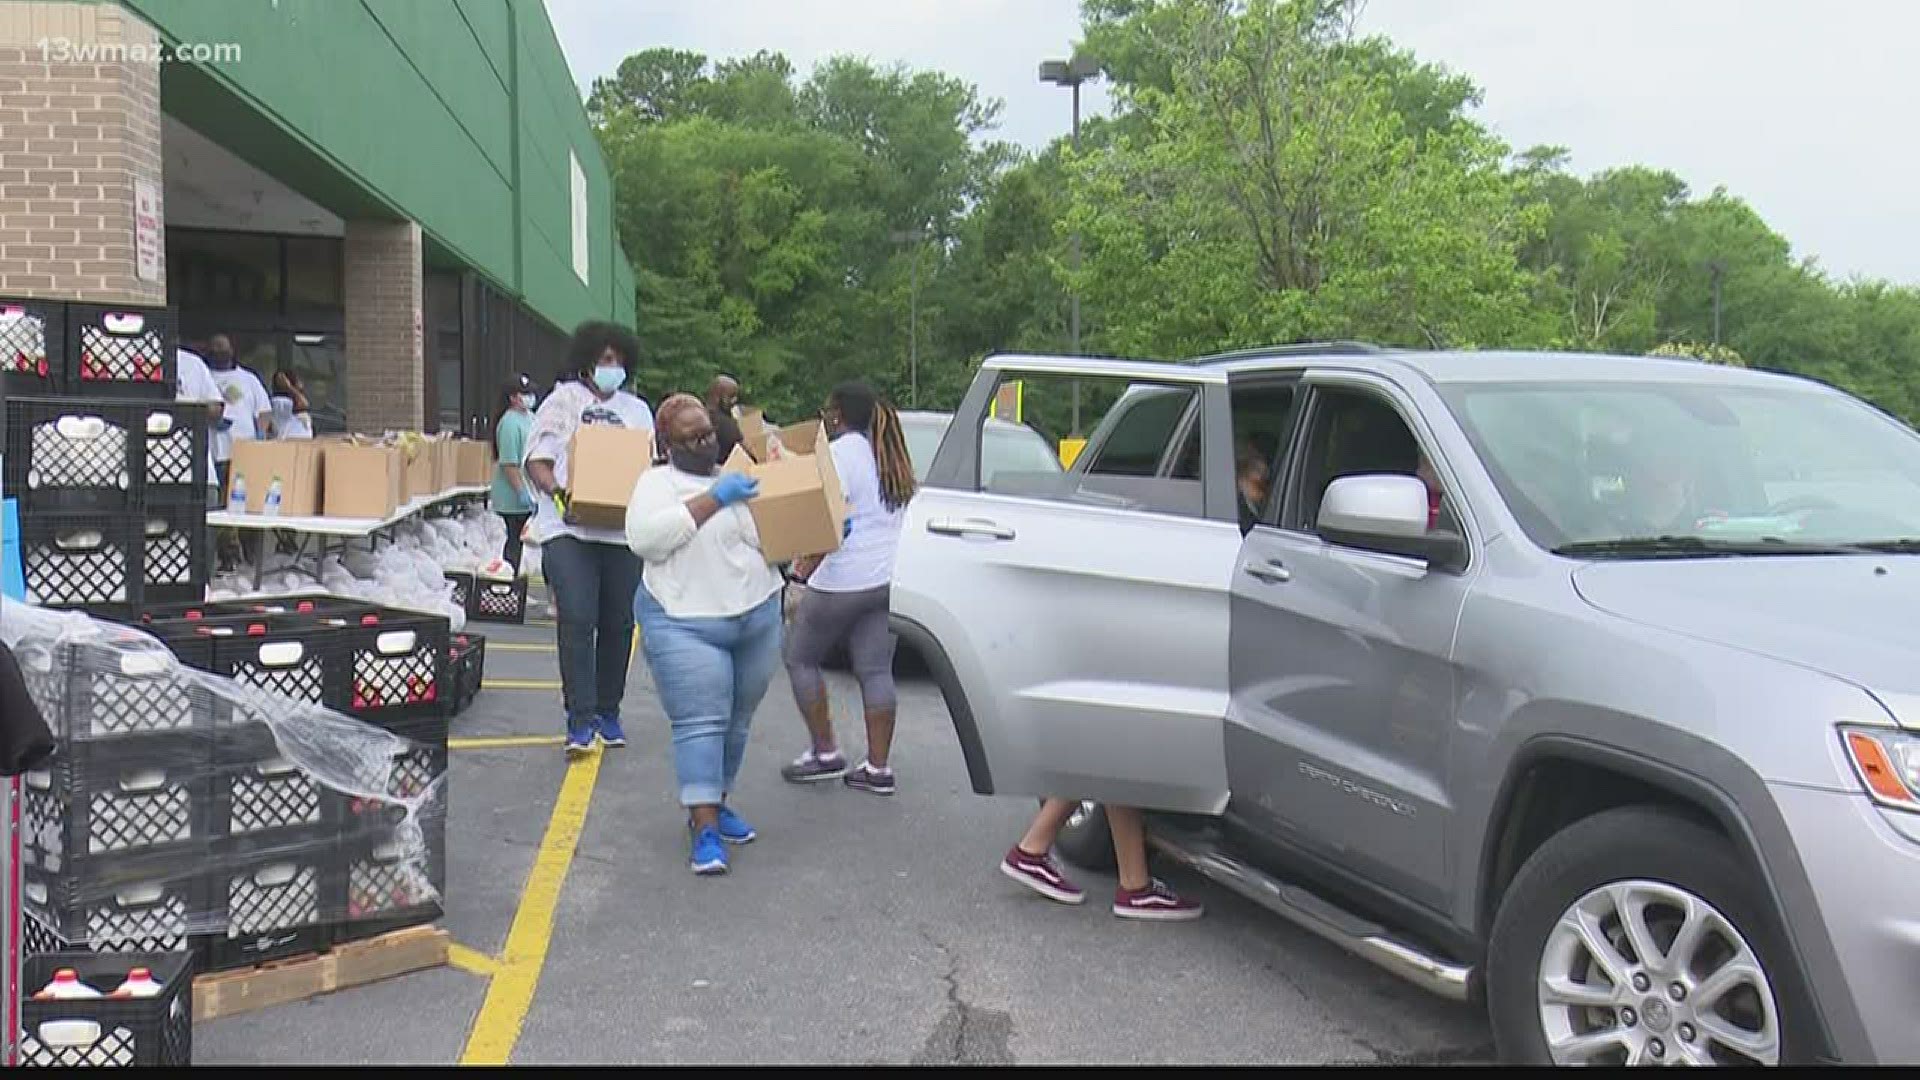 The food drive was one of the largest the area has seen.